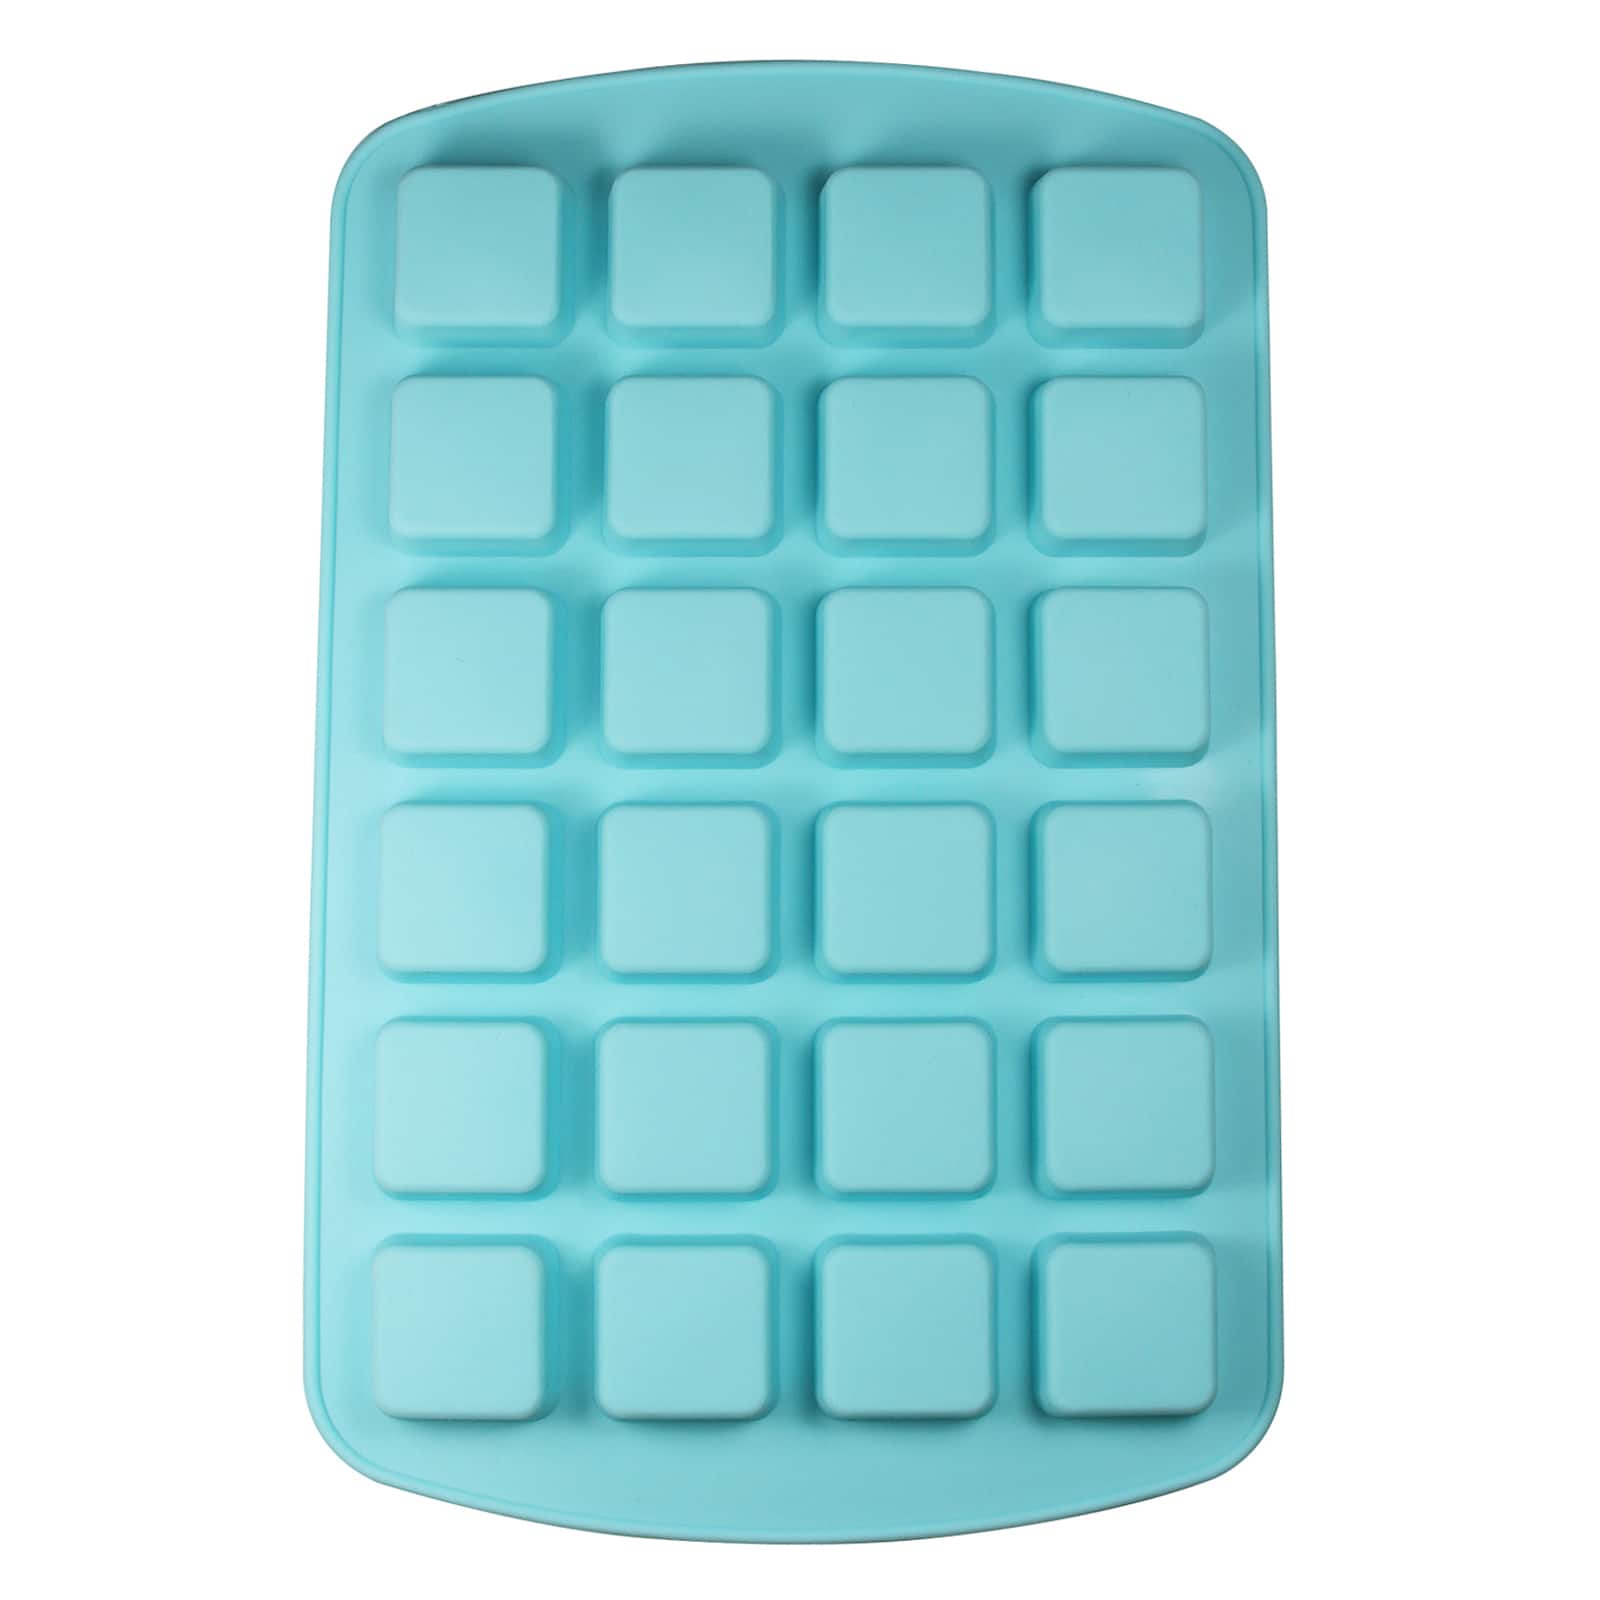 Bite-Size Silicone Treat Mold by Celebrate It® - image 3 of 3